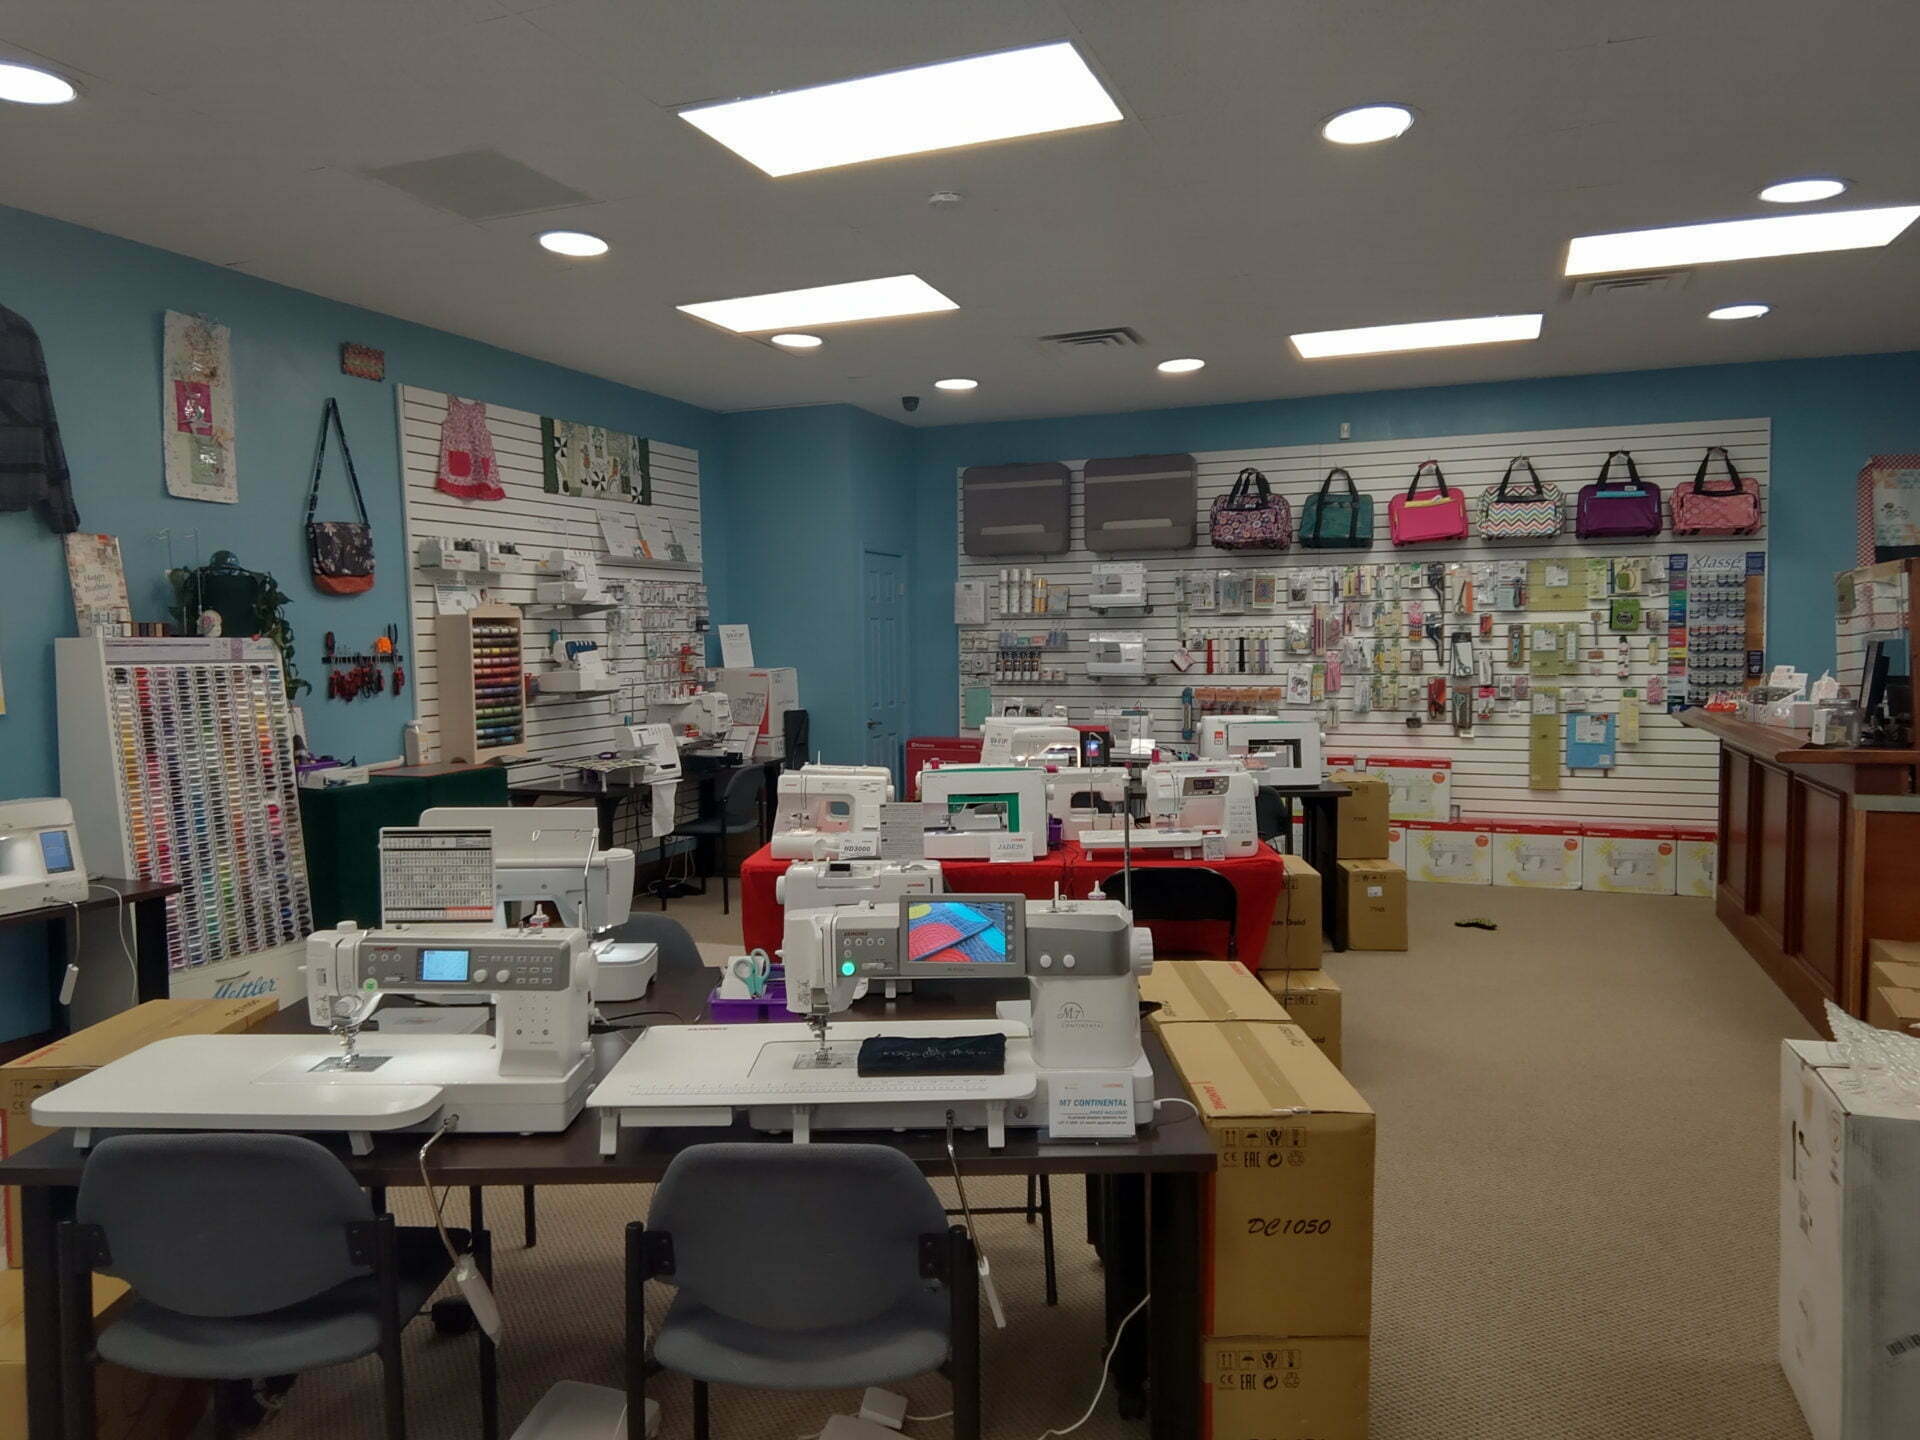 Boulder Open Sew all afternoon! Bring your machine and projects to sew with other sewing enthusiasts!